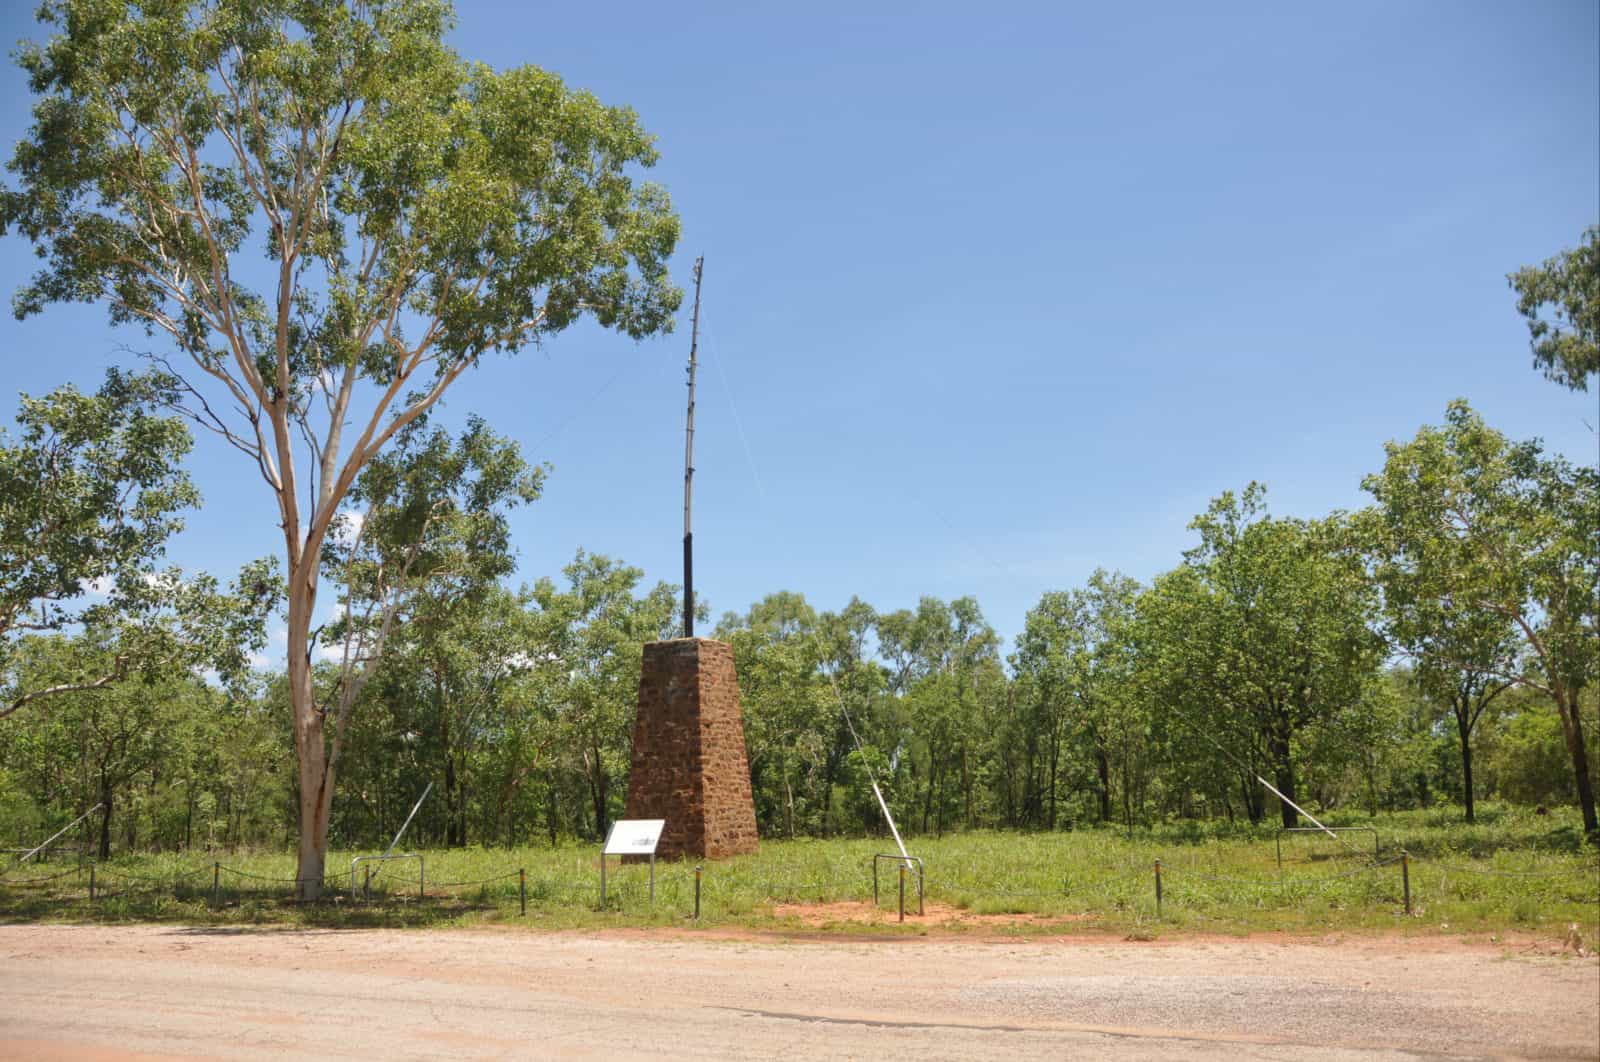 Pylon on the north bank of the Katherine River.